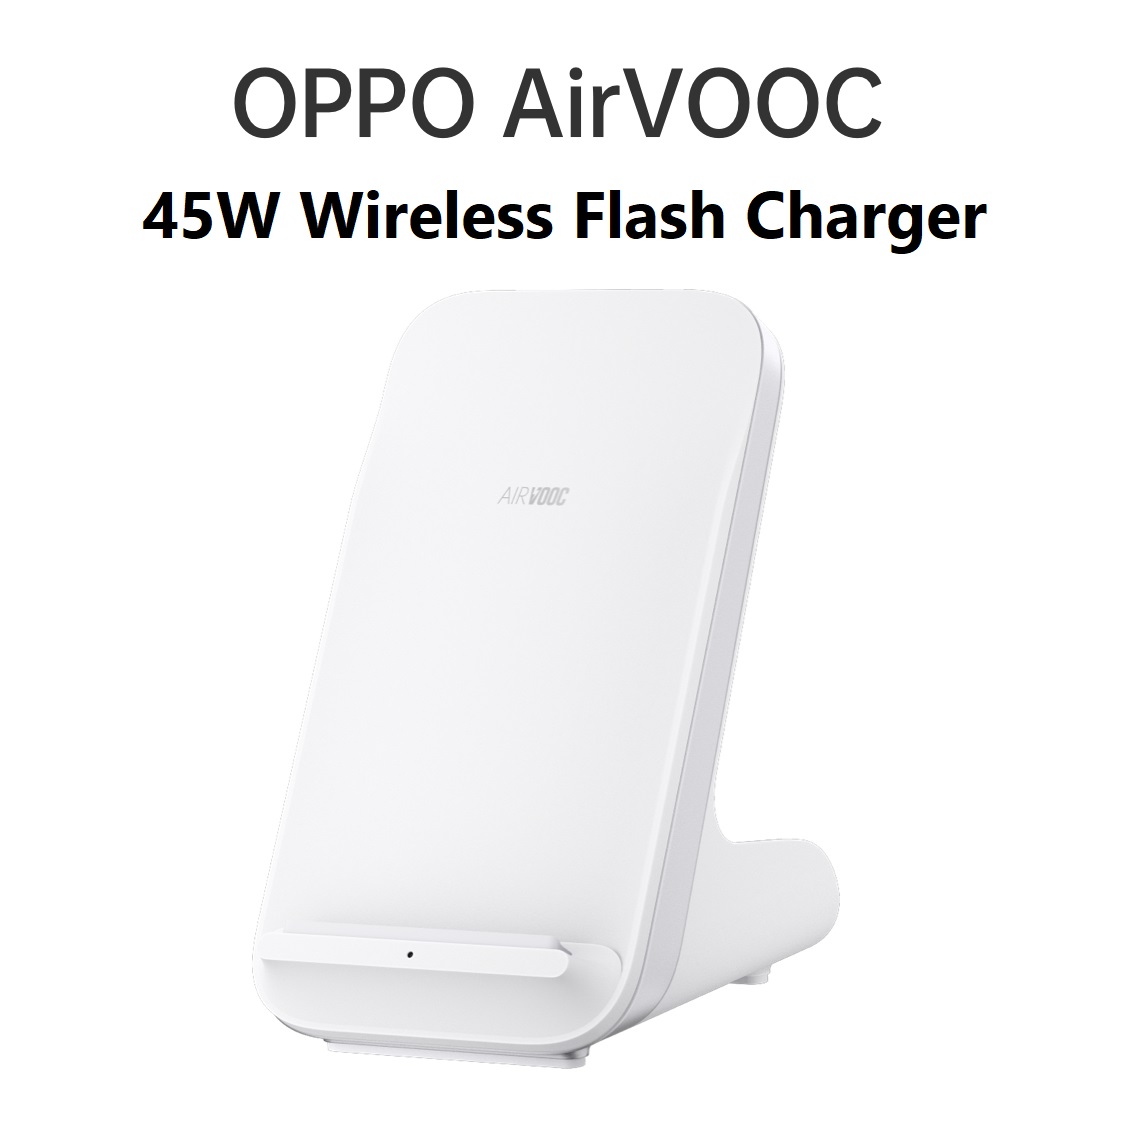 OPPO_45W_AirVOOC_Wireless_Charger-01.jpg